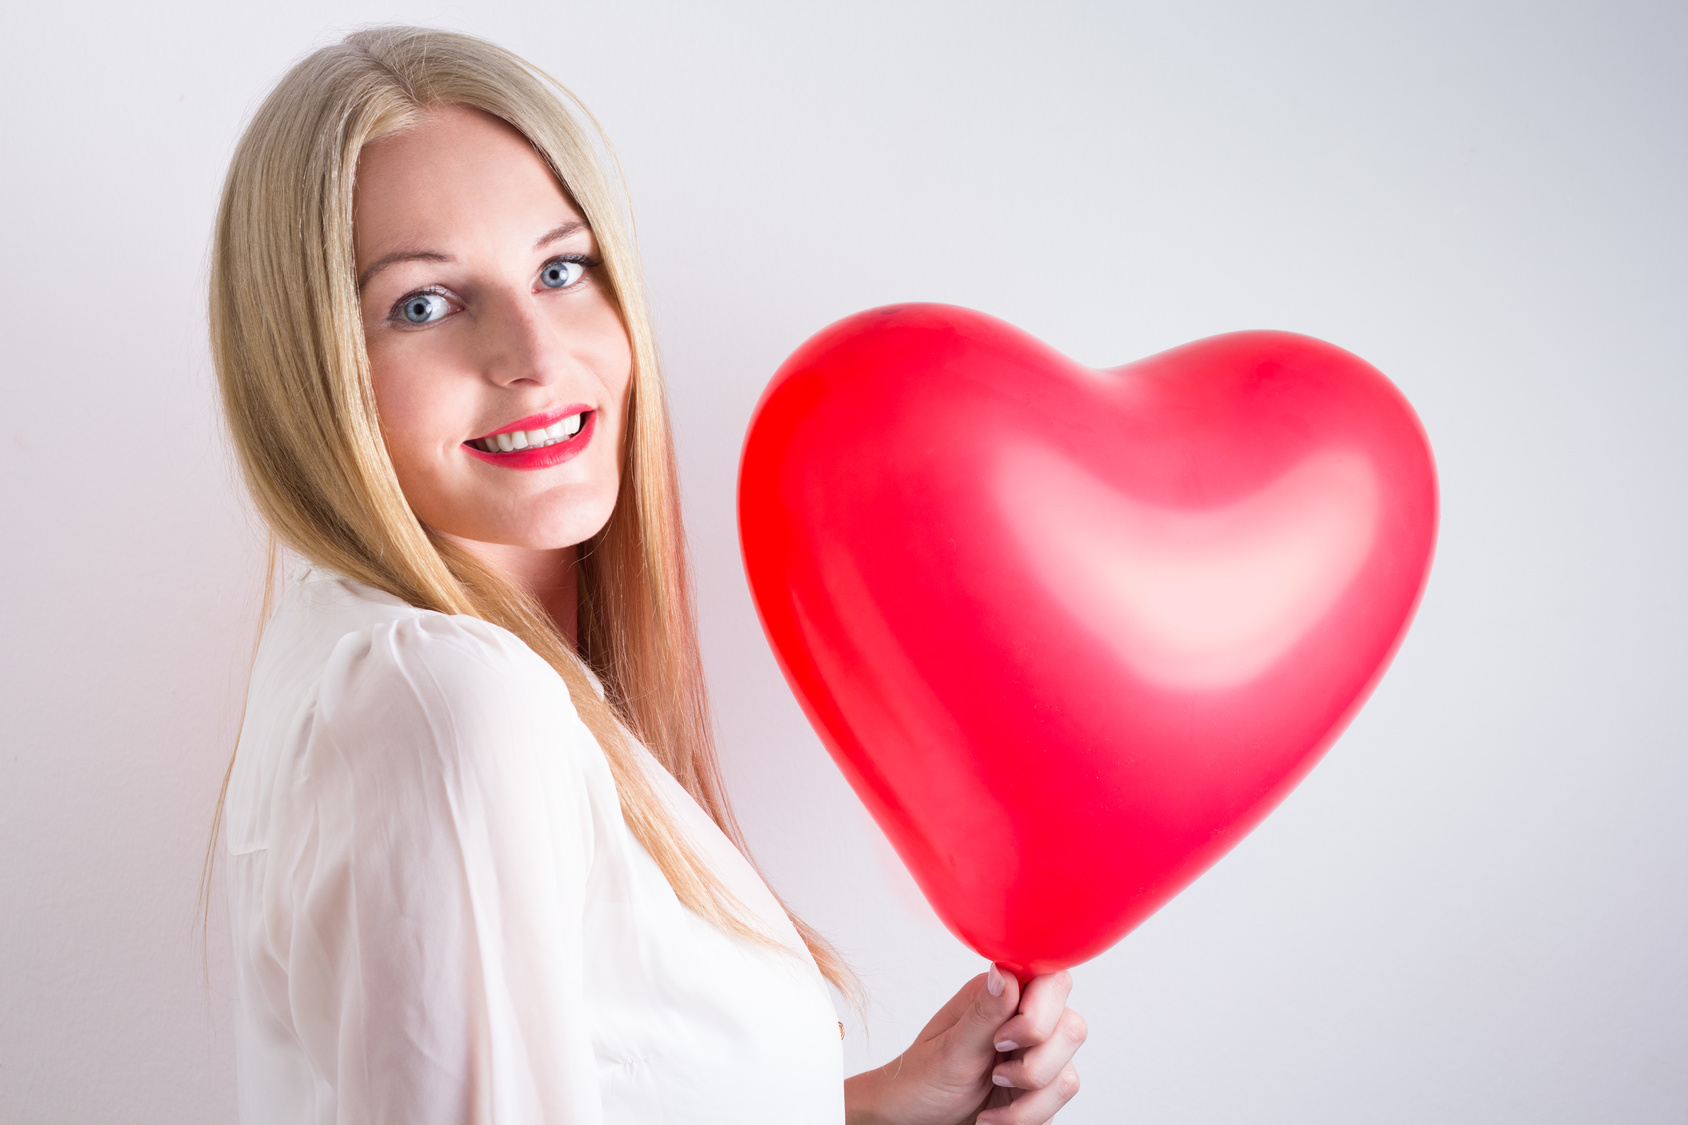 Woman holding a red heart balloon